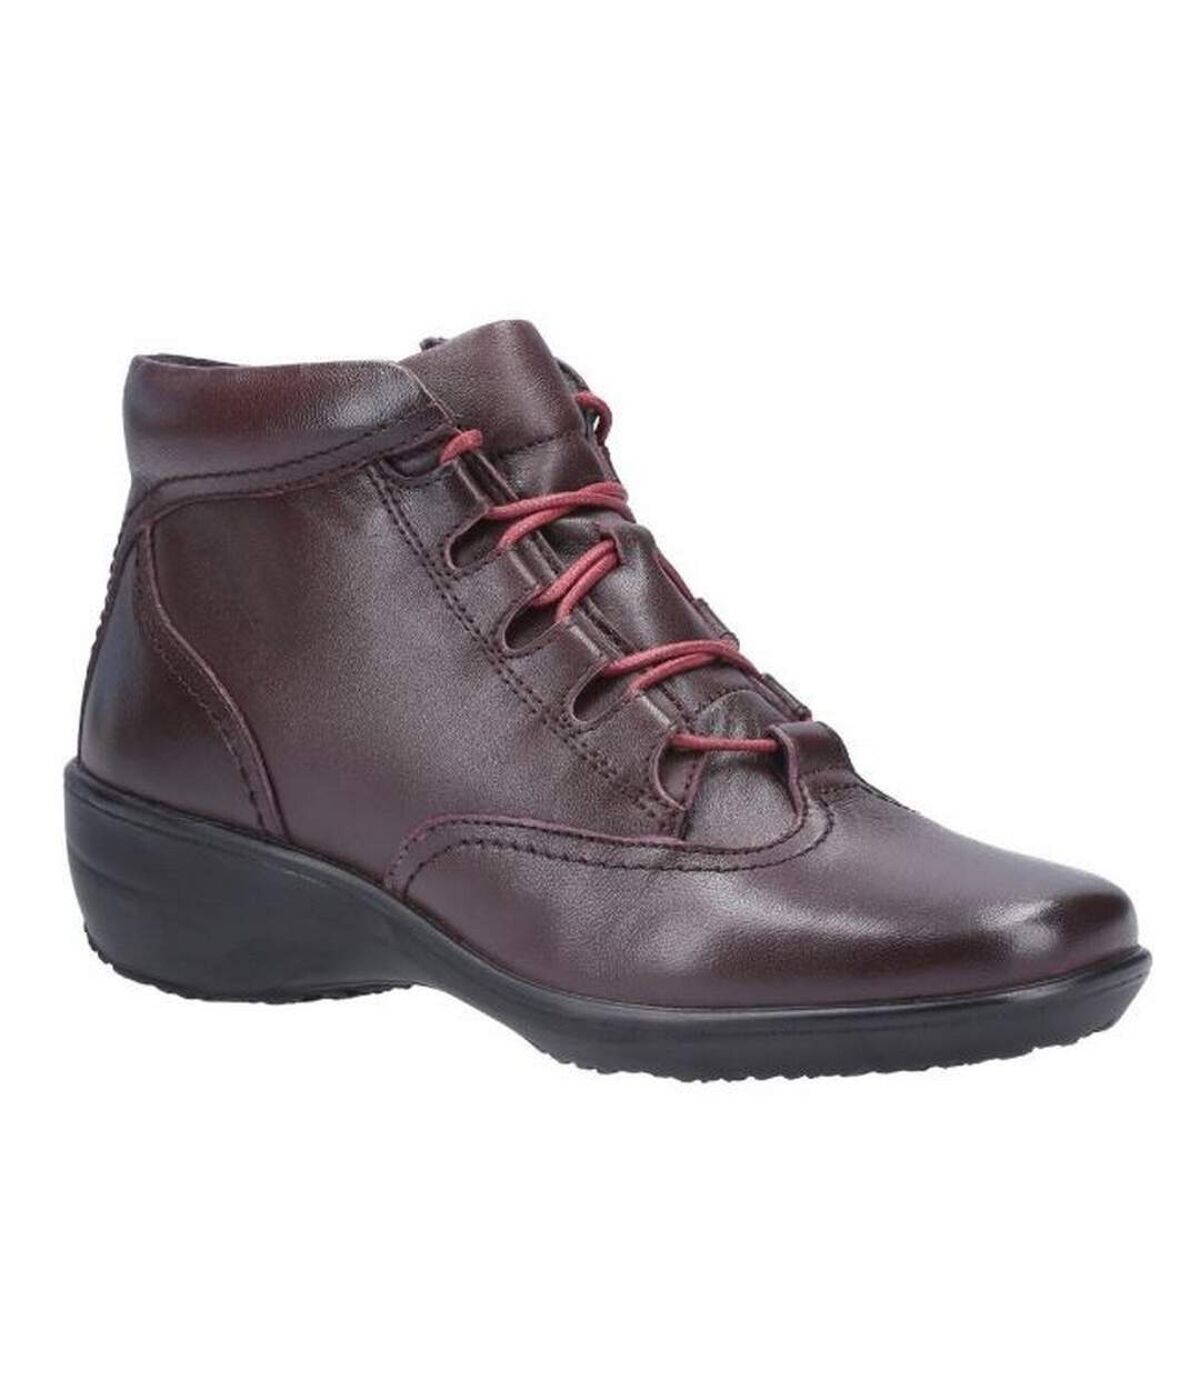 Fleet & Foster Womens/Ladies Merle Lace Up Leather Ankle Boot (Burgundy) - UTFS6749